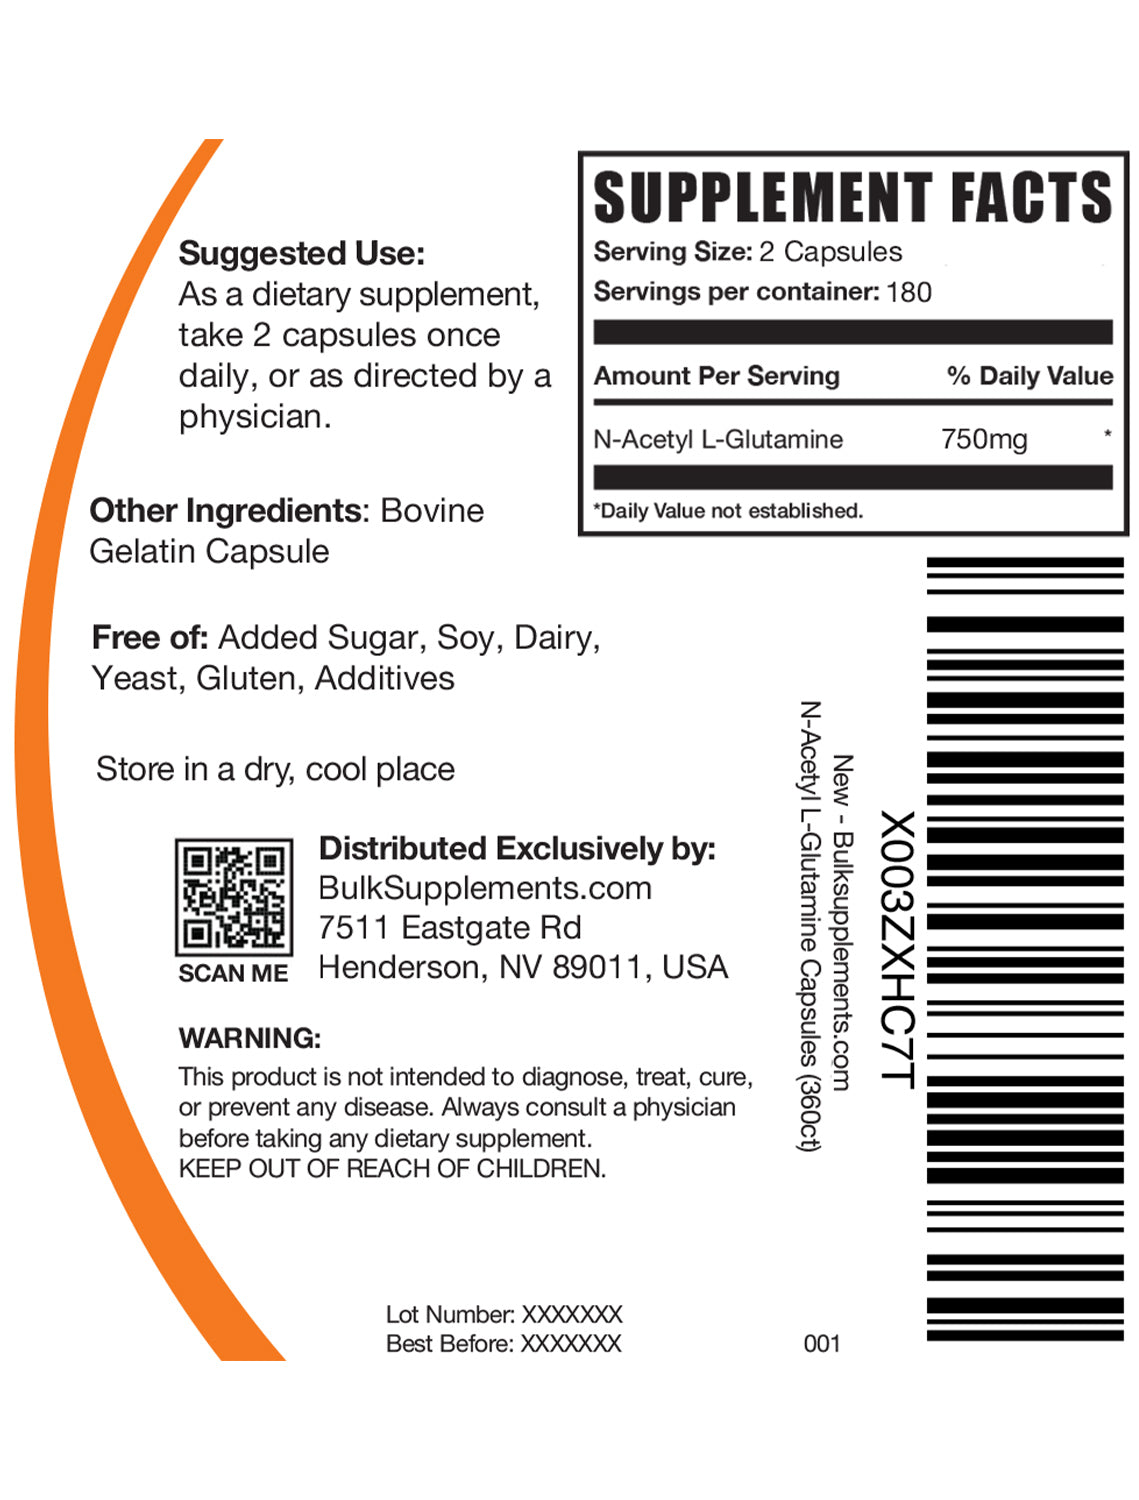 Supplement Facts n-acetyl l-glutamine capsules